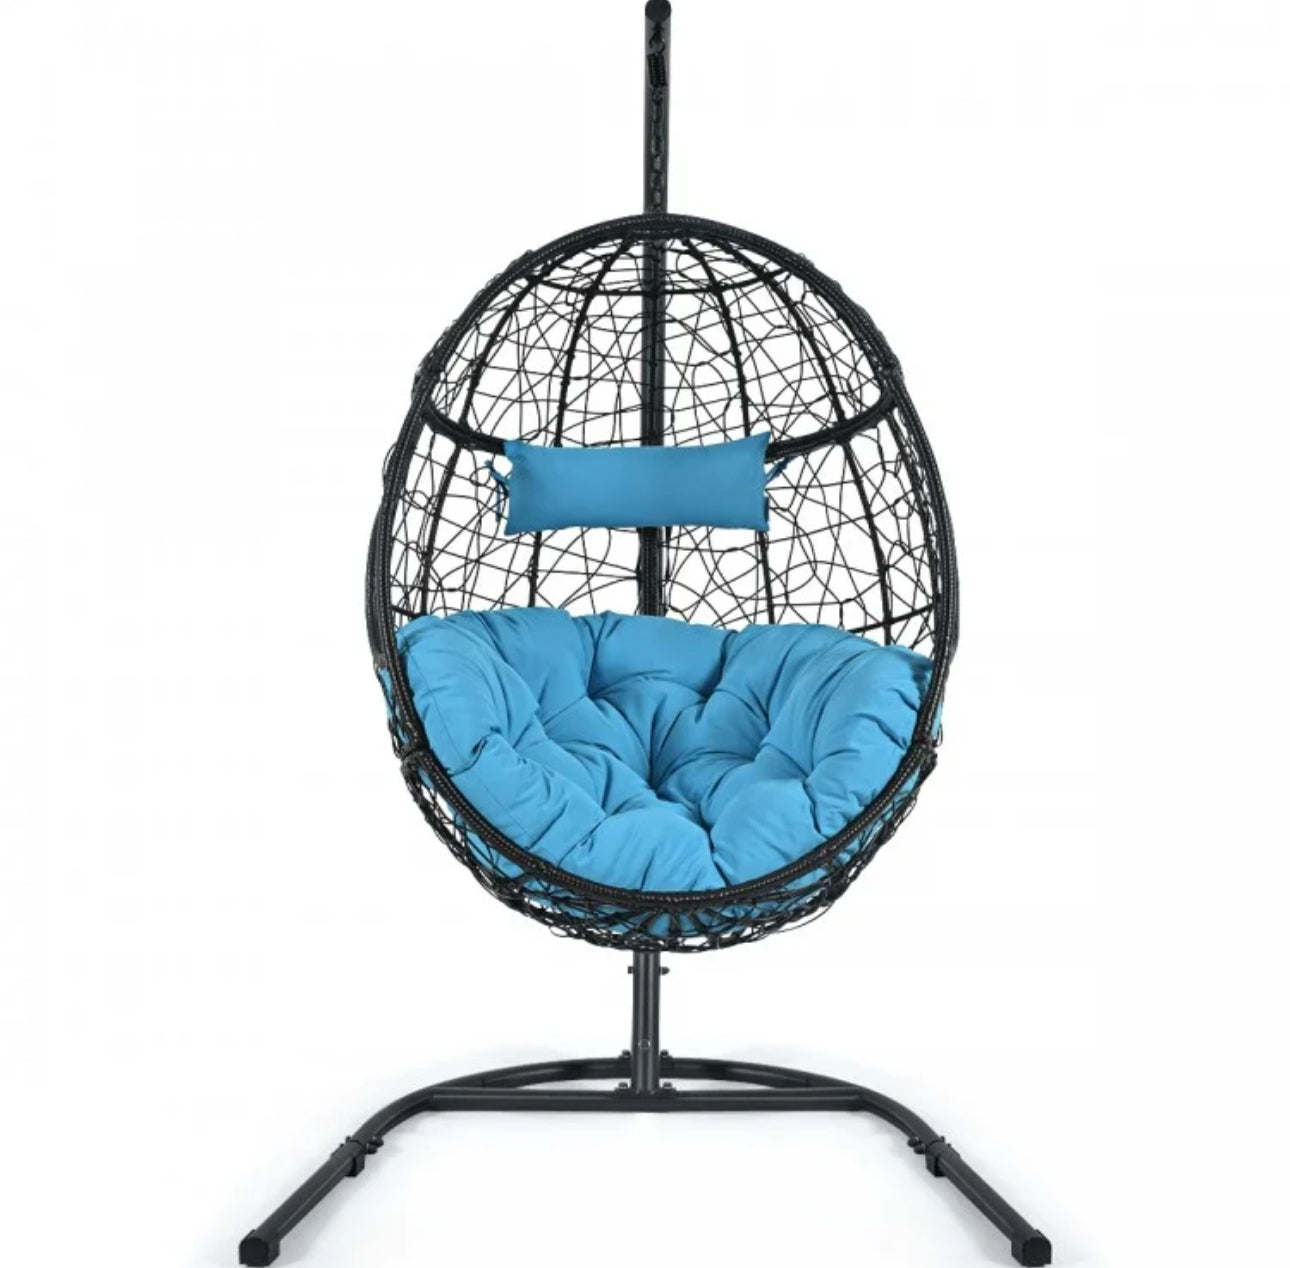 Outdoor / Indoor Patio Egg Swing Chair W/ Stand, Cushion, Pole, Basket - Heavy Duty Chair | Very Comfy Cushions | Hammock | Comes In 2 Colours | Holds 250lbs